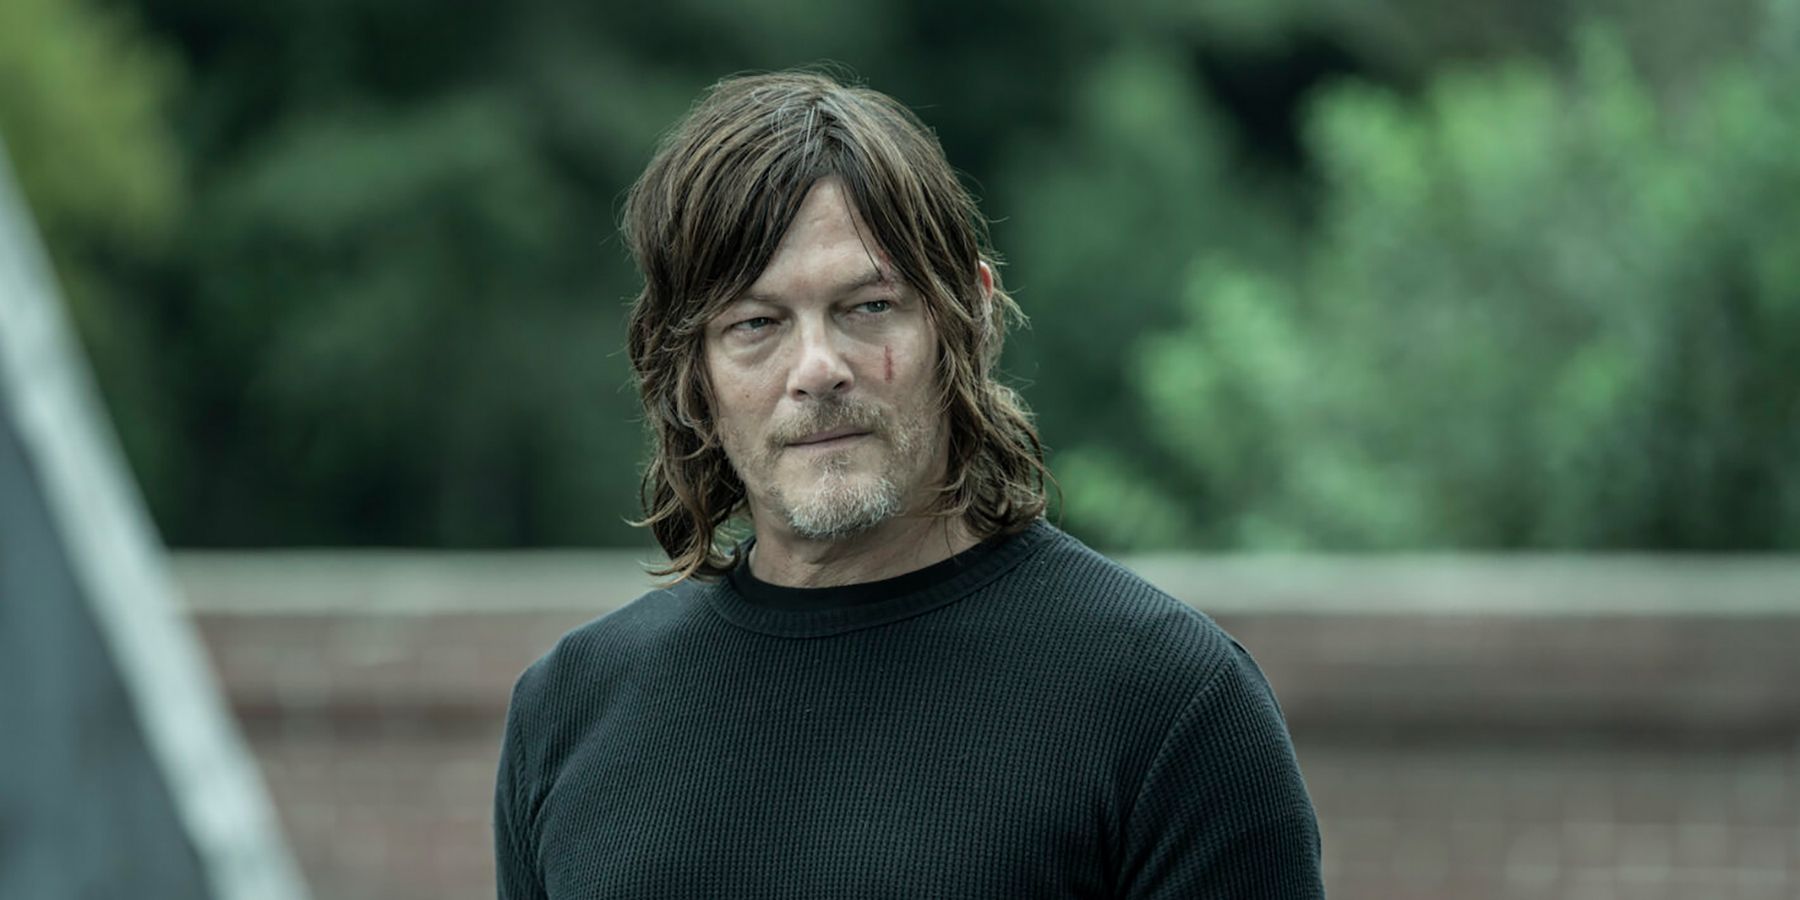 The Walking Dead's Daryl Dixon Spinoff Gets An Official Title From AMC